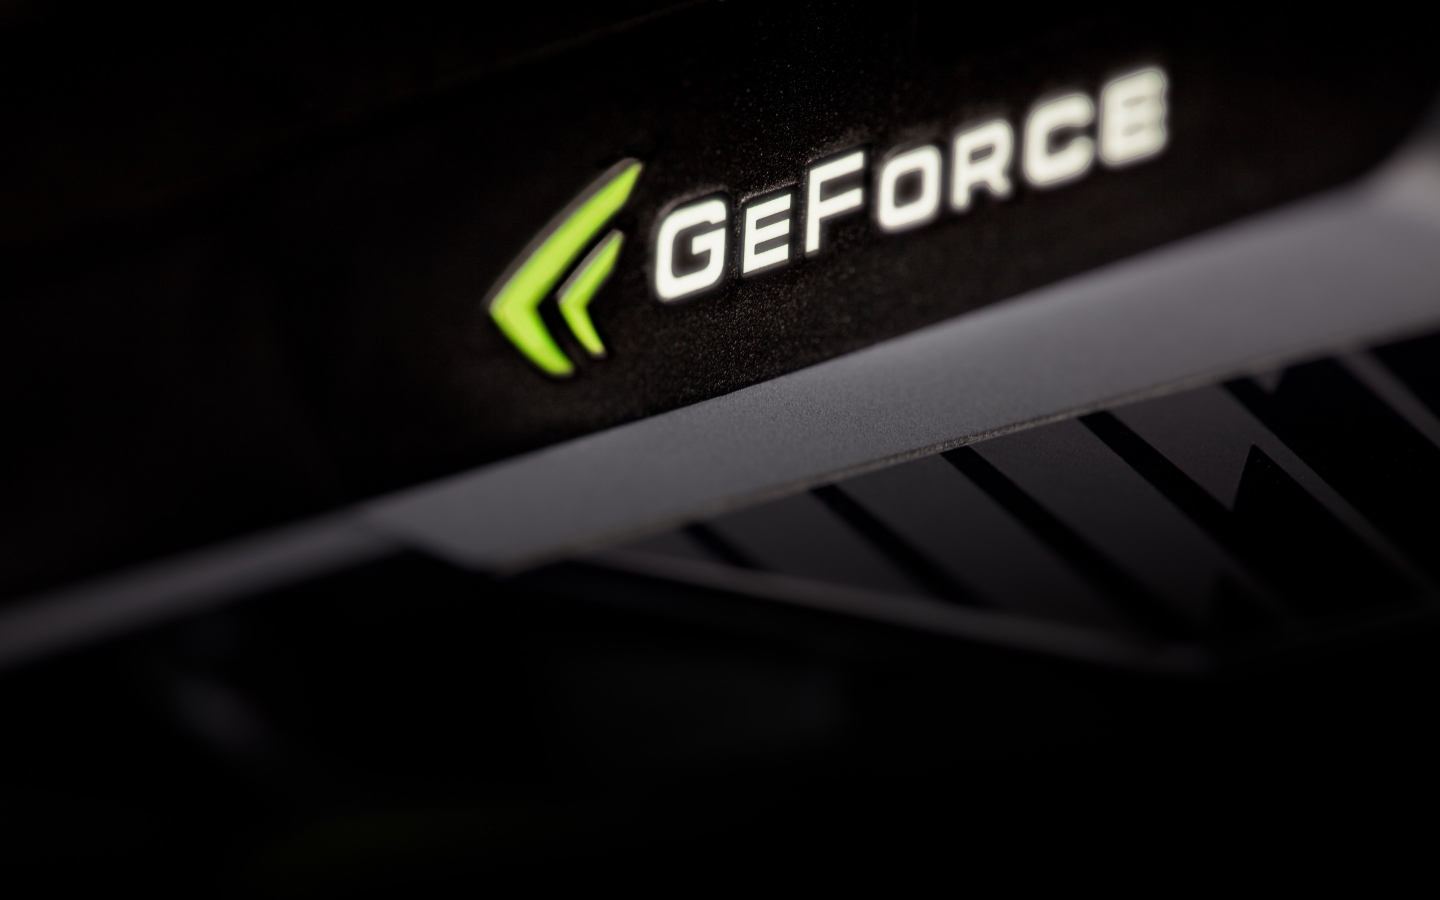 GeForce Graphics for 1440 x 900 widescreen resolution